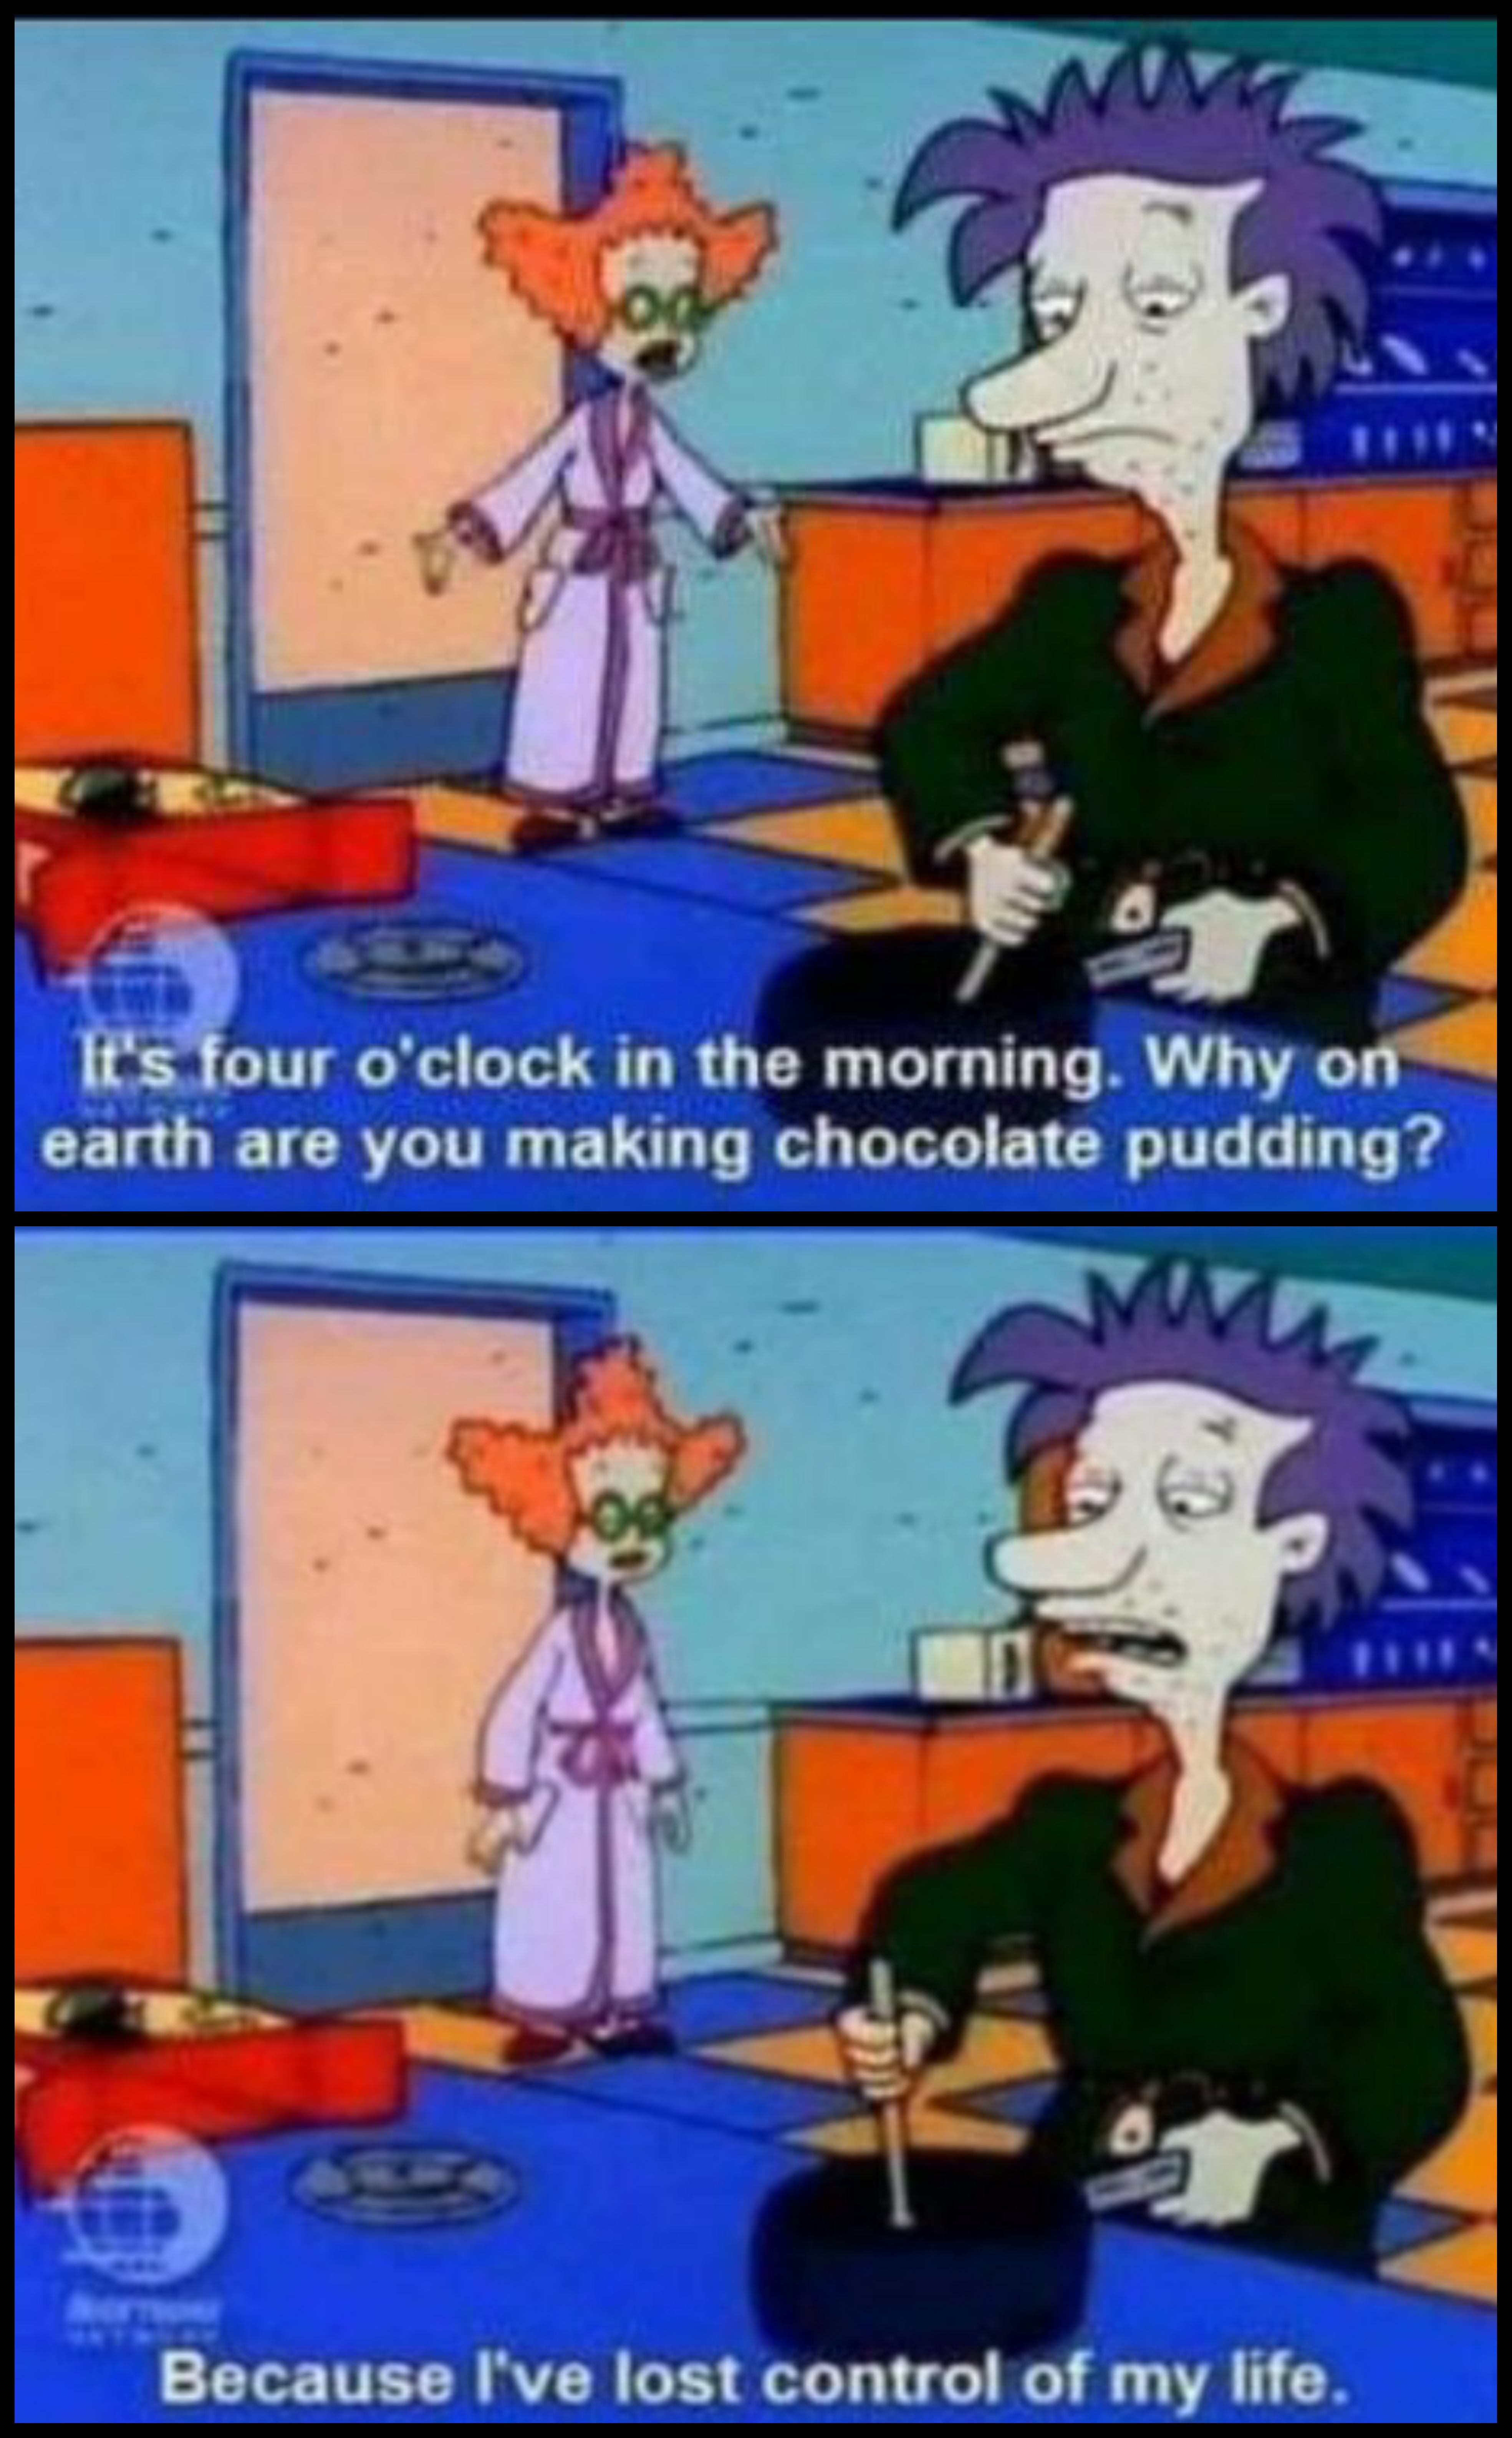 And that's just fine right now, Stu.